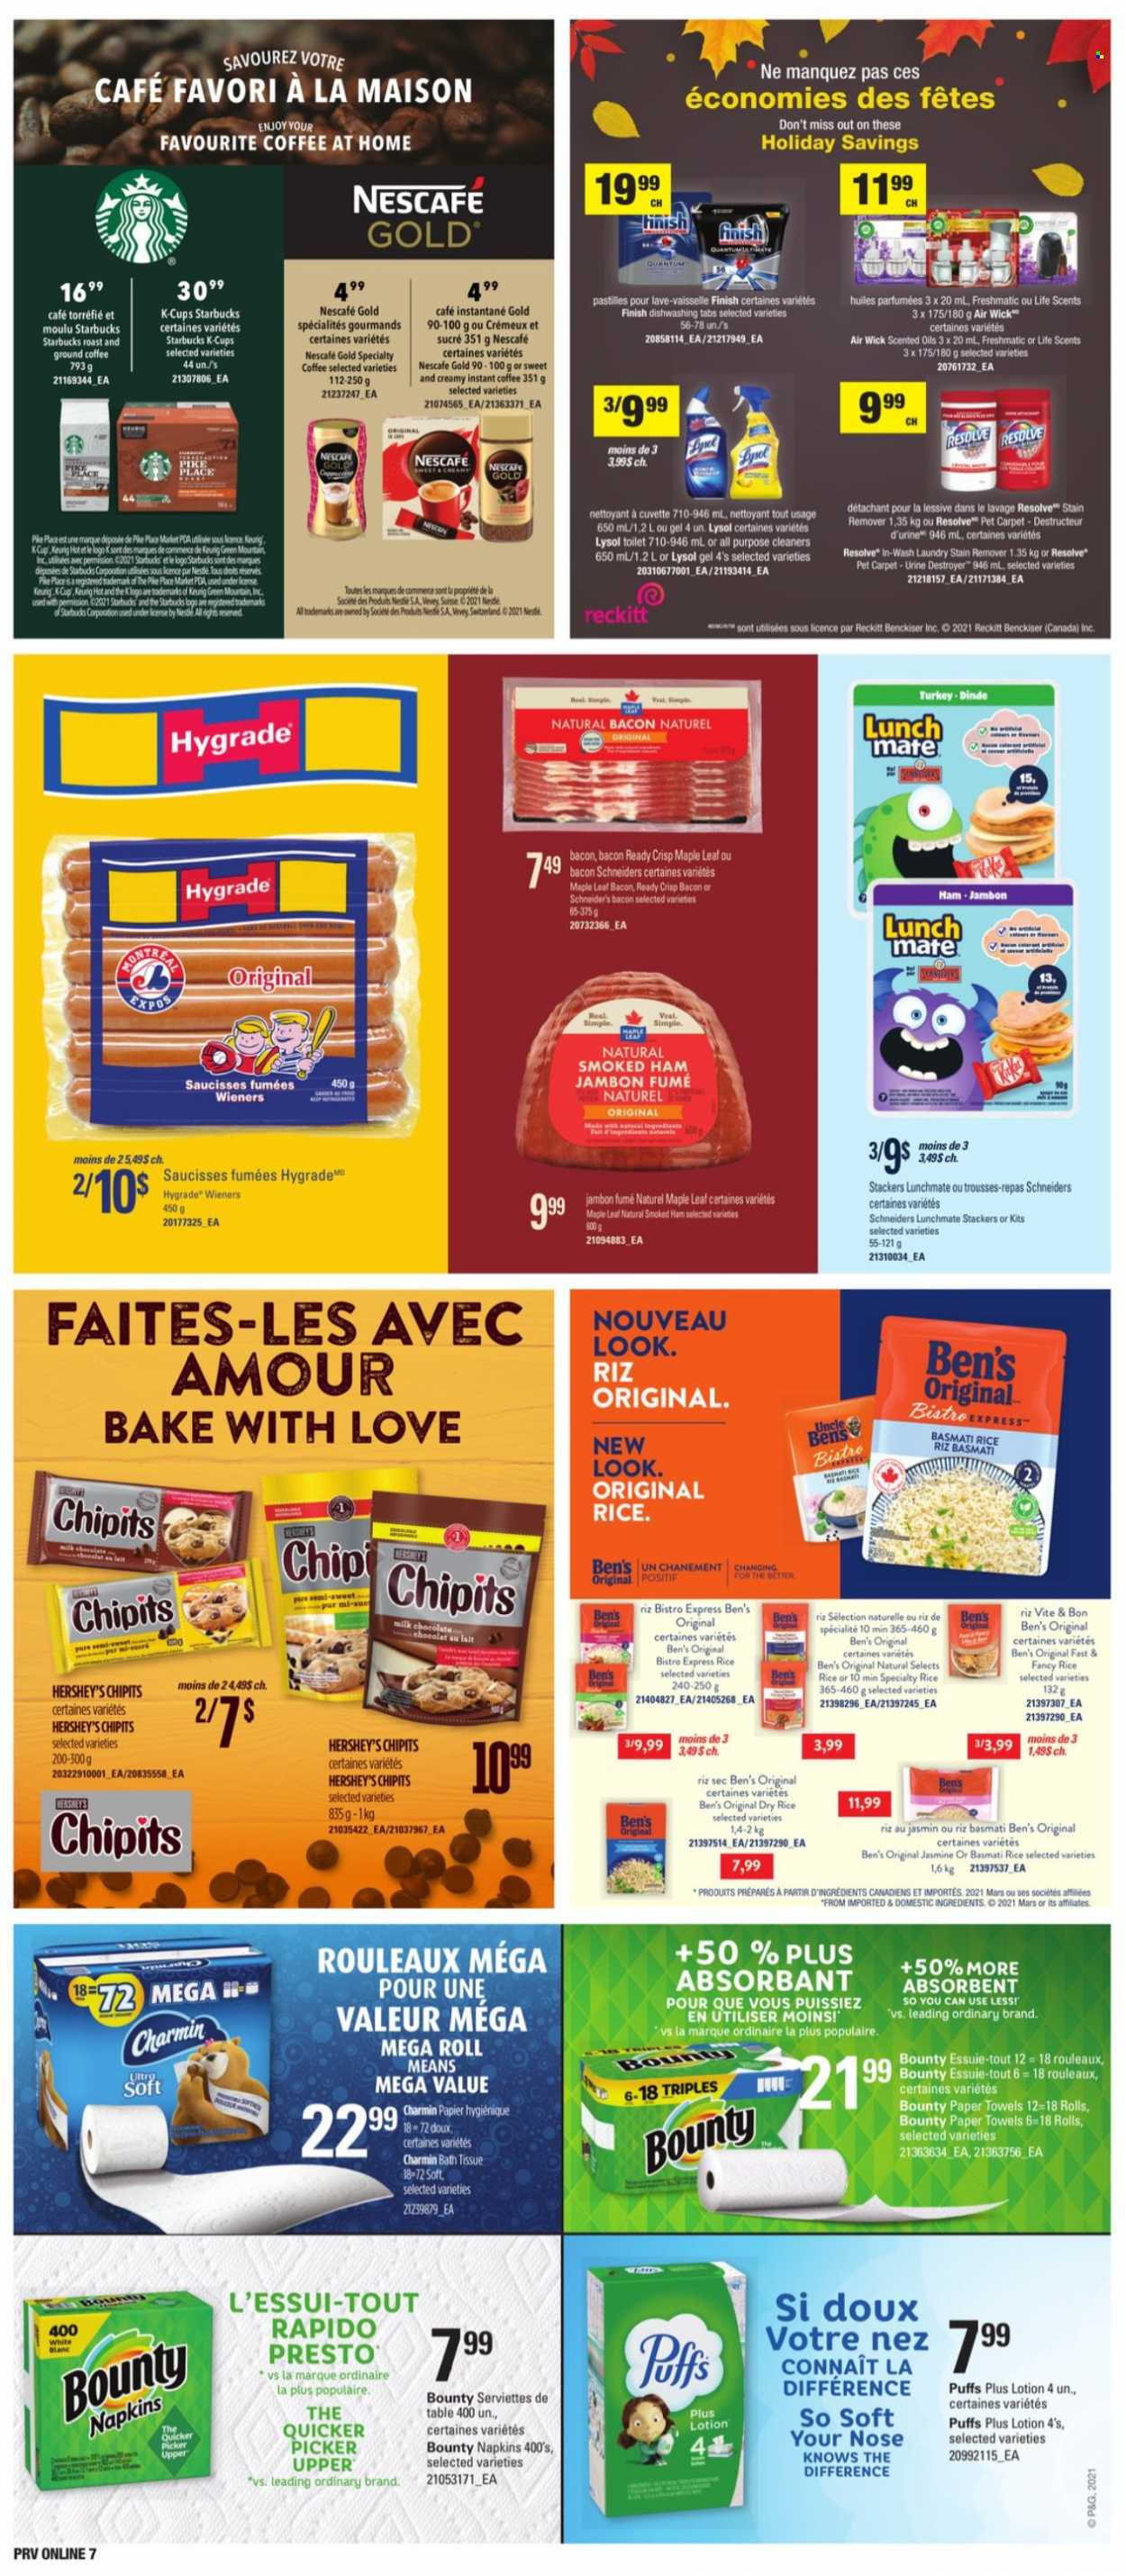 thumbnail - Provigo Flyer - October 14, 2021 - October 20, 2021 - Sales products - Ace, puffs, bacon, ham, smoked ham, milk, Hershey's, Bounty, Mars, pastilles, Uncle Ben's, basmati rice, instant coffee, ground coffee, coffee capsules, Starbucks, K-Cups, Keurig, Green Mountain, napkins, bath tissue, kitchen towels, paper towels, Charmin, stain remover, Lysol, Nestlé, Nescafé. Page 12.